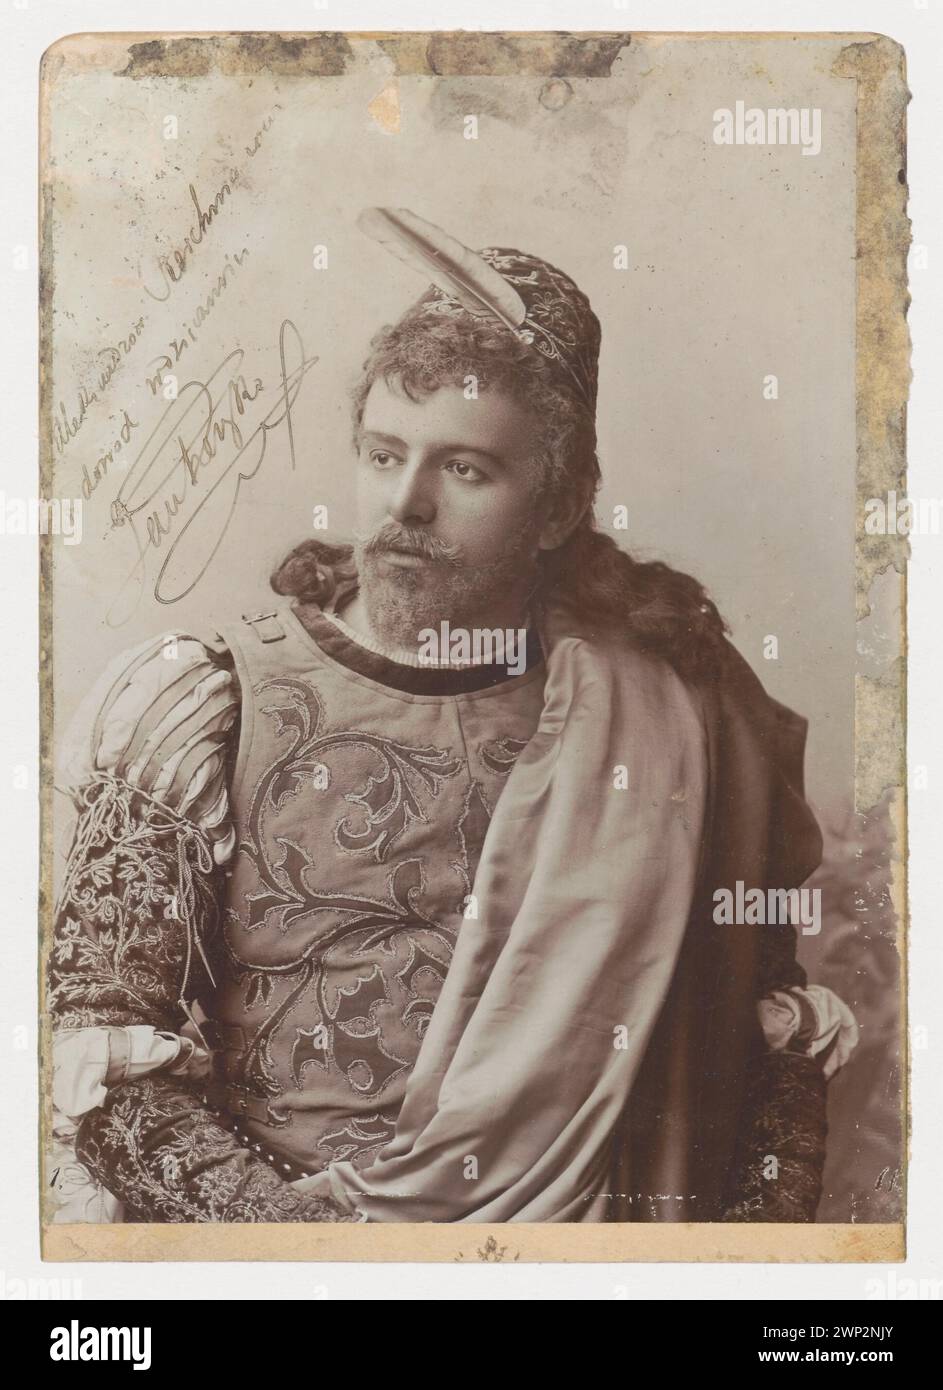 Portrait of Jan Reszke (1850-1925), BEAUTY, in the stage costume Romeo (later a character) from the opera "Romeo and Julia" by Charles Gounod at the Grand Theater in Warsaw - photography with dedication for Aleksander Rajchman; Mieczkowski, Jan (Warsaw; photographic Zak 1893 (1893-00-00-1893-00-00);Gounod, Charles (1818-1893). Romeo and Julia, Rajchman, Aleksander (1855-1915), Rajchman, Aleksander (1855-1915)-dedication for, Rajchman, Aleksander (1855-1915)-collection, Reszke, Jan (1850-1925), Reszte, Jan (1850 -1925) -dedication from, Reszke, Jan (1850-1925) -iconography, Romeo Monteki (lit.) Stock Photo